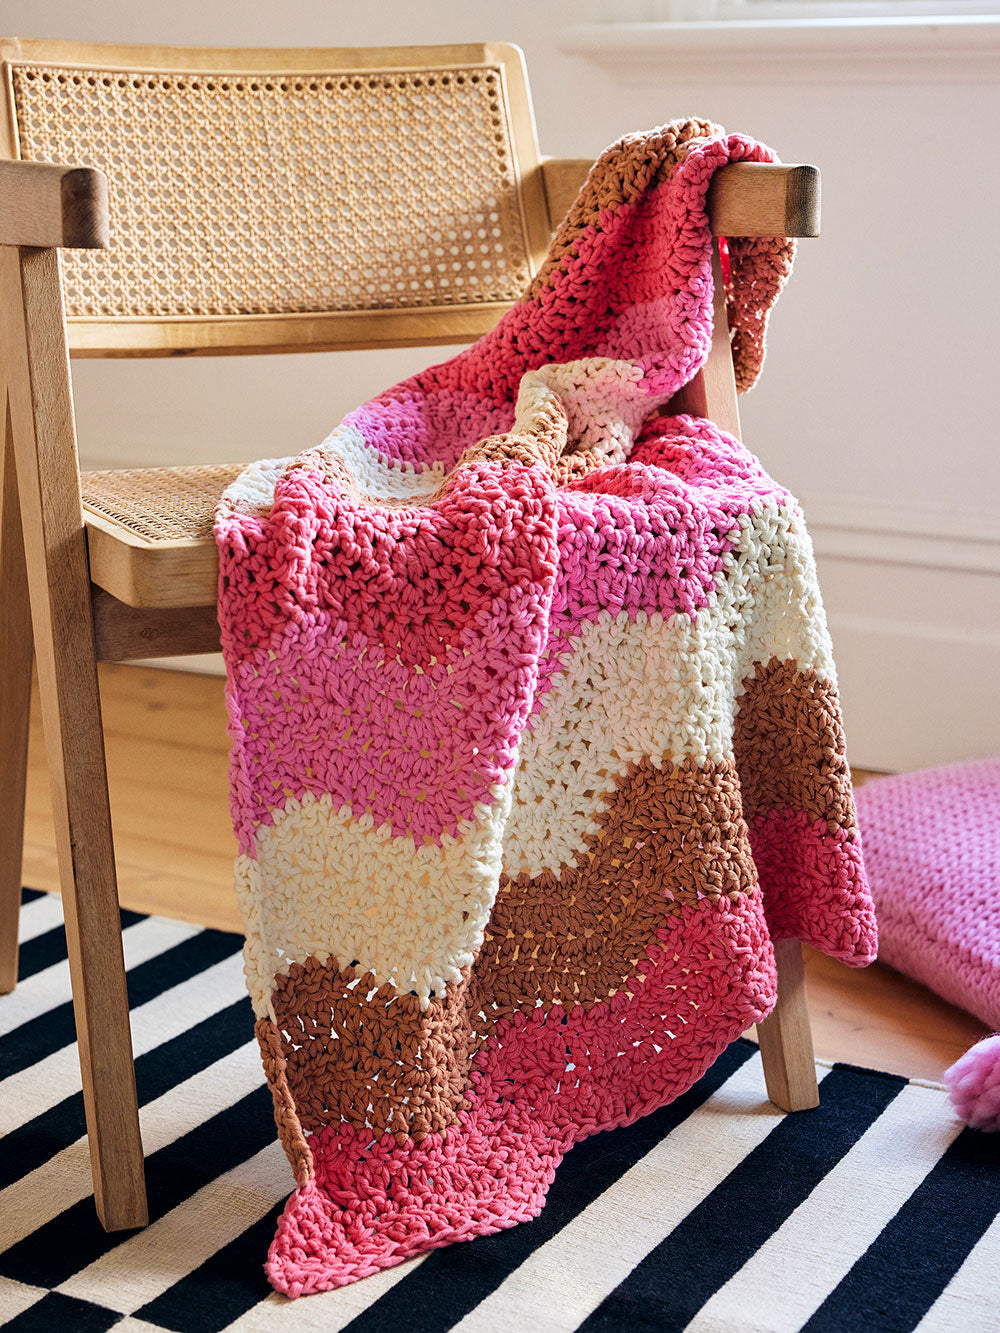 Image of Margot wave crochet baby blanket draped over a chair.